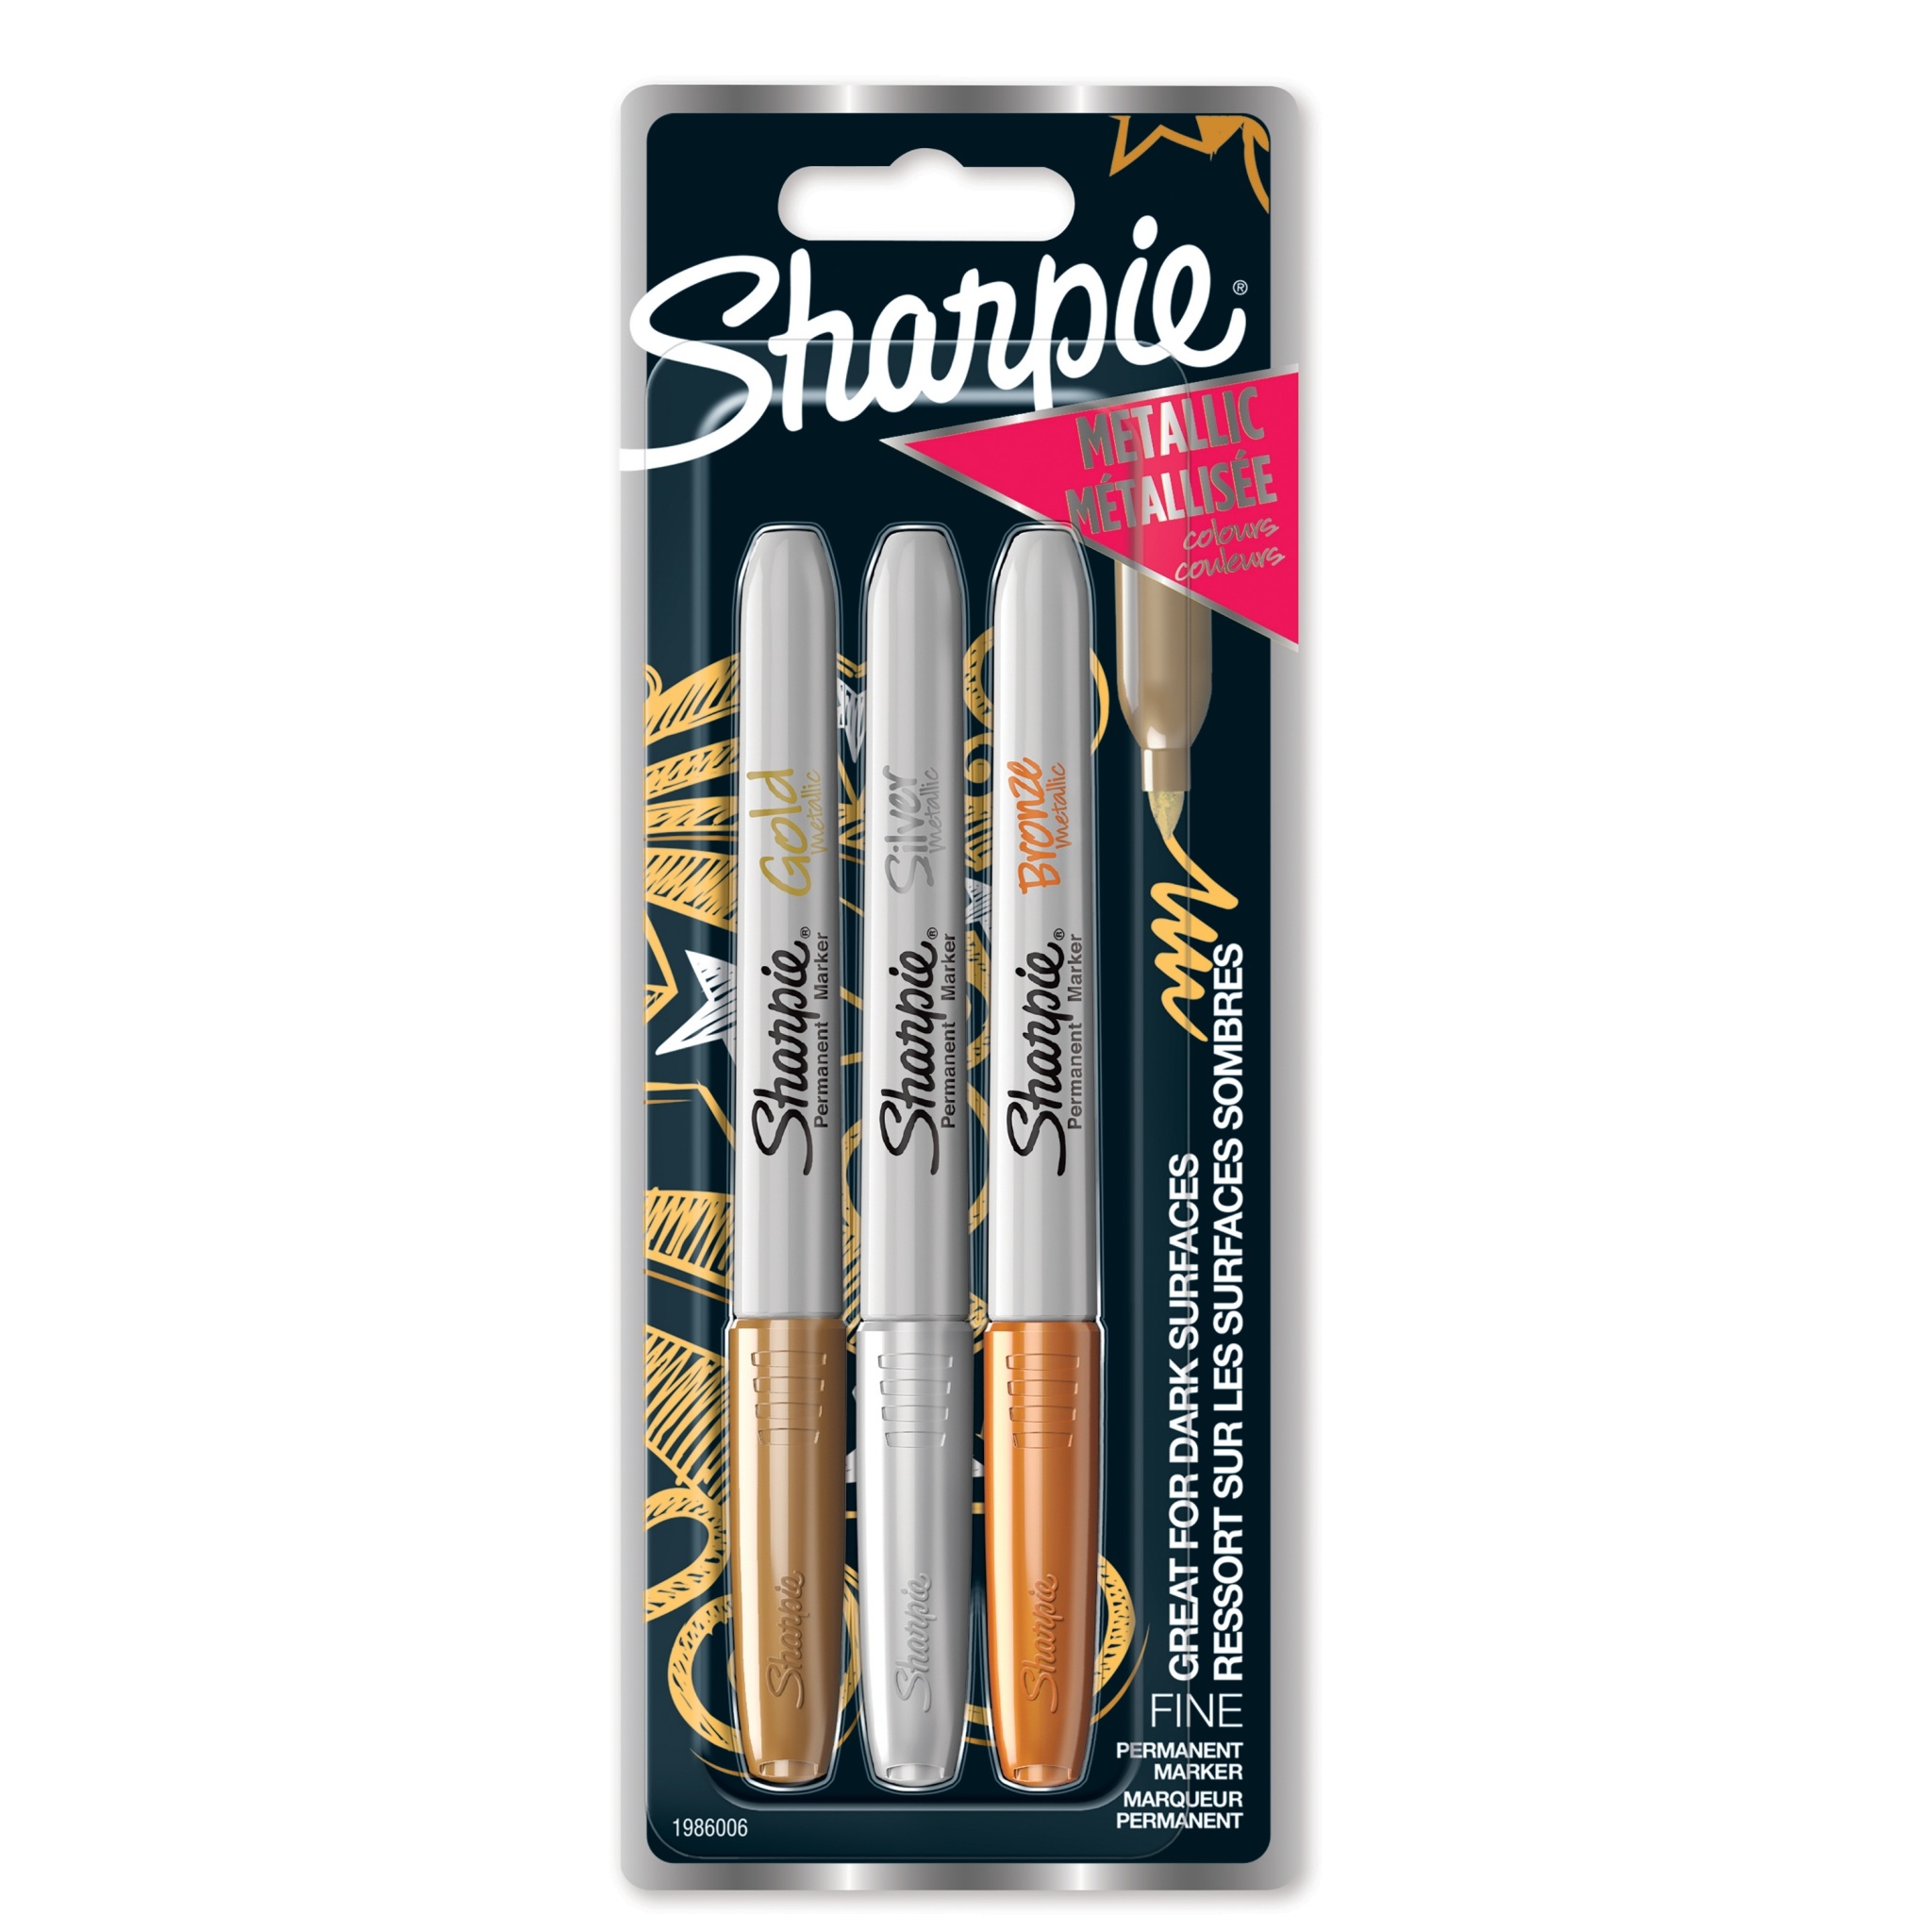 Sharpie 1986006 Blister Pack 3 Assorted Metallic Colors